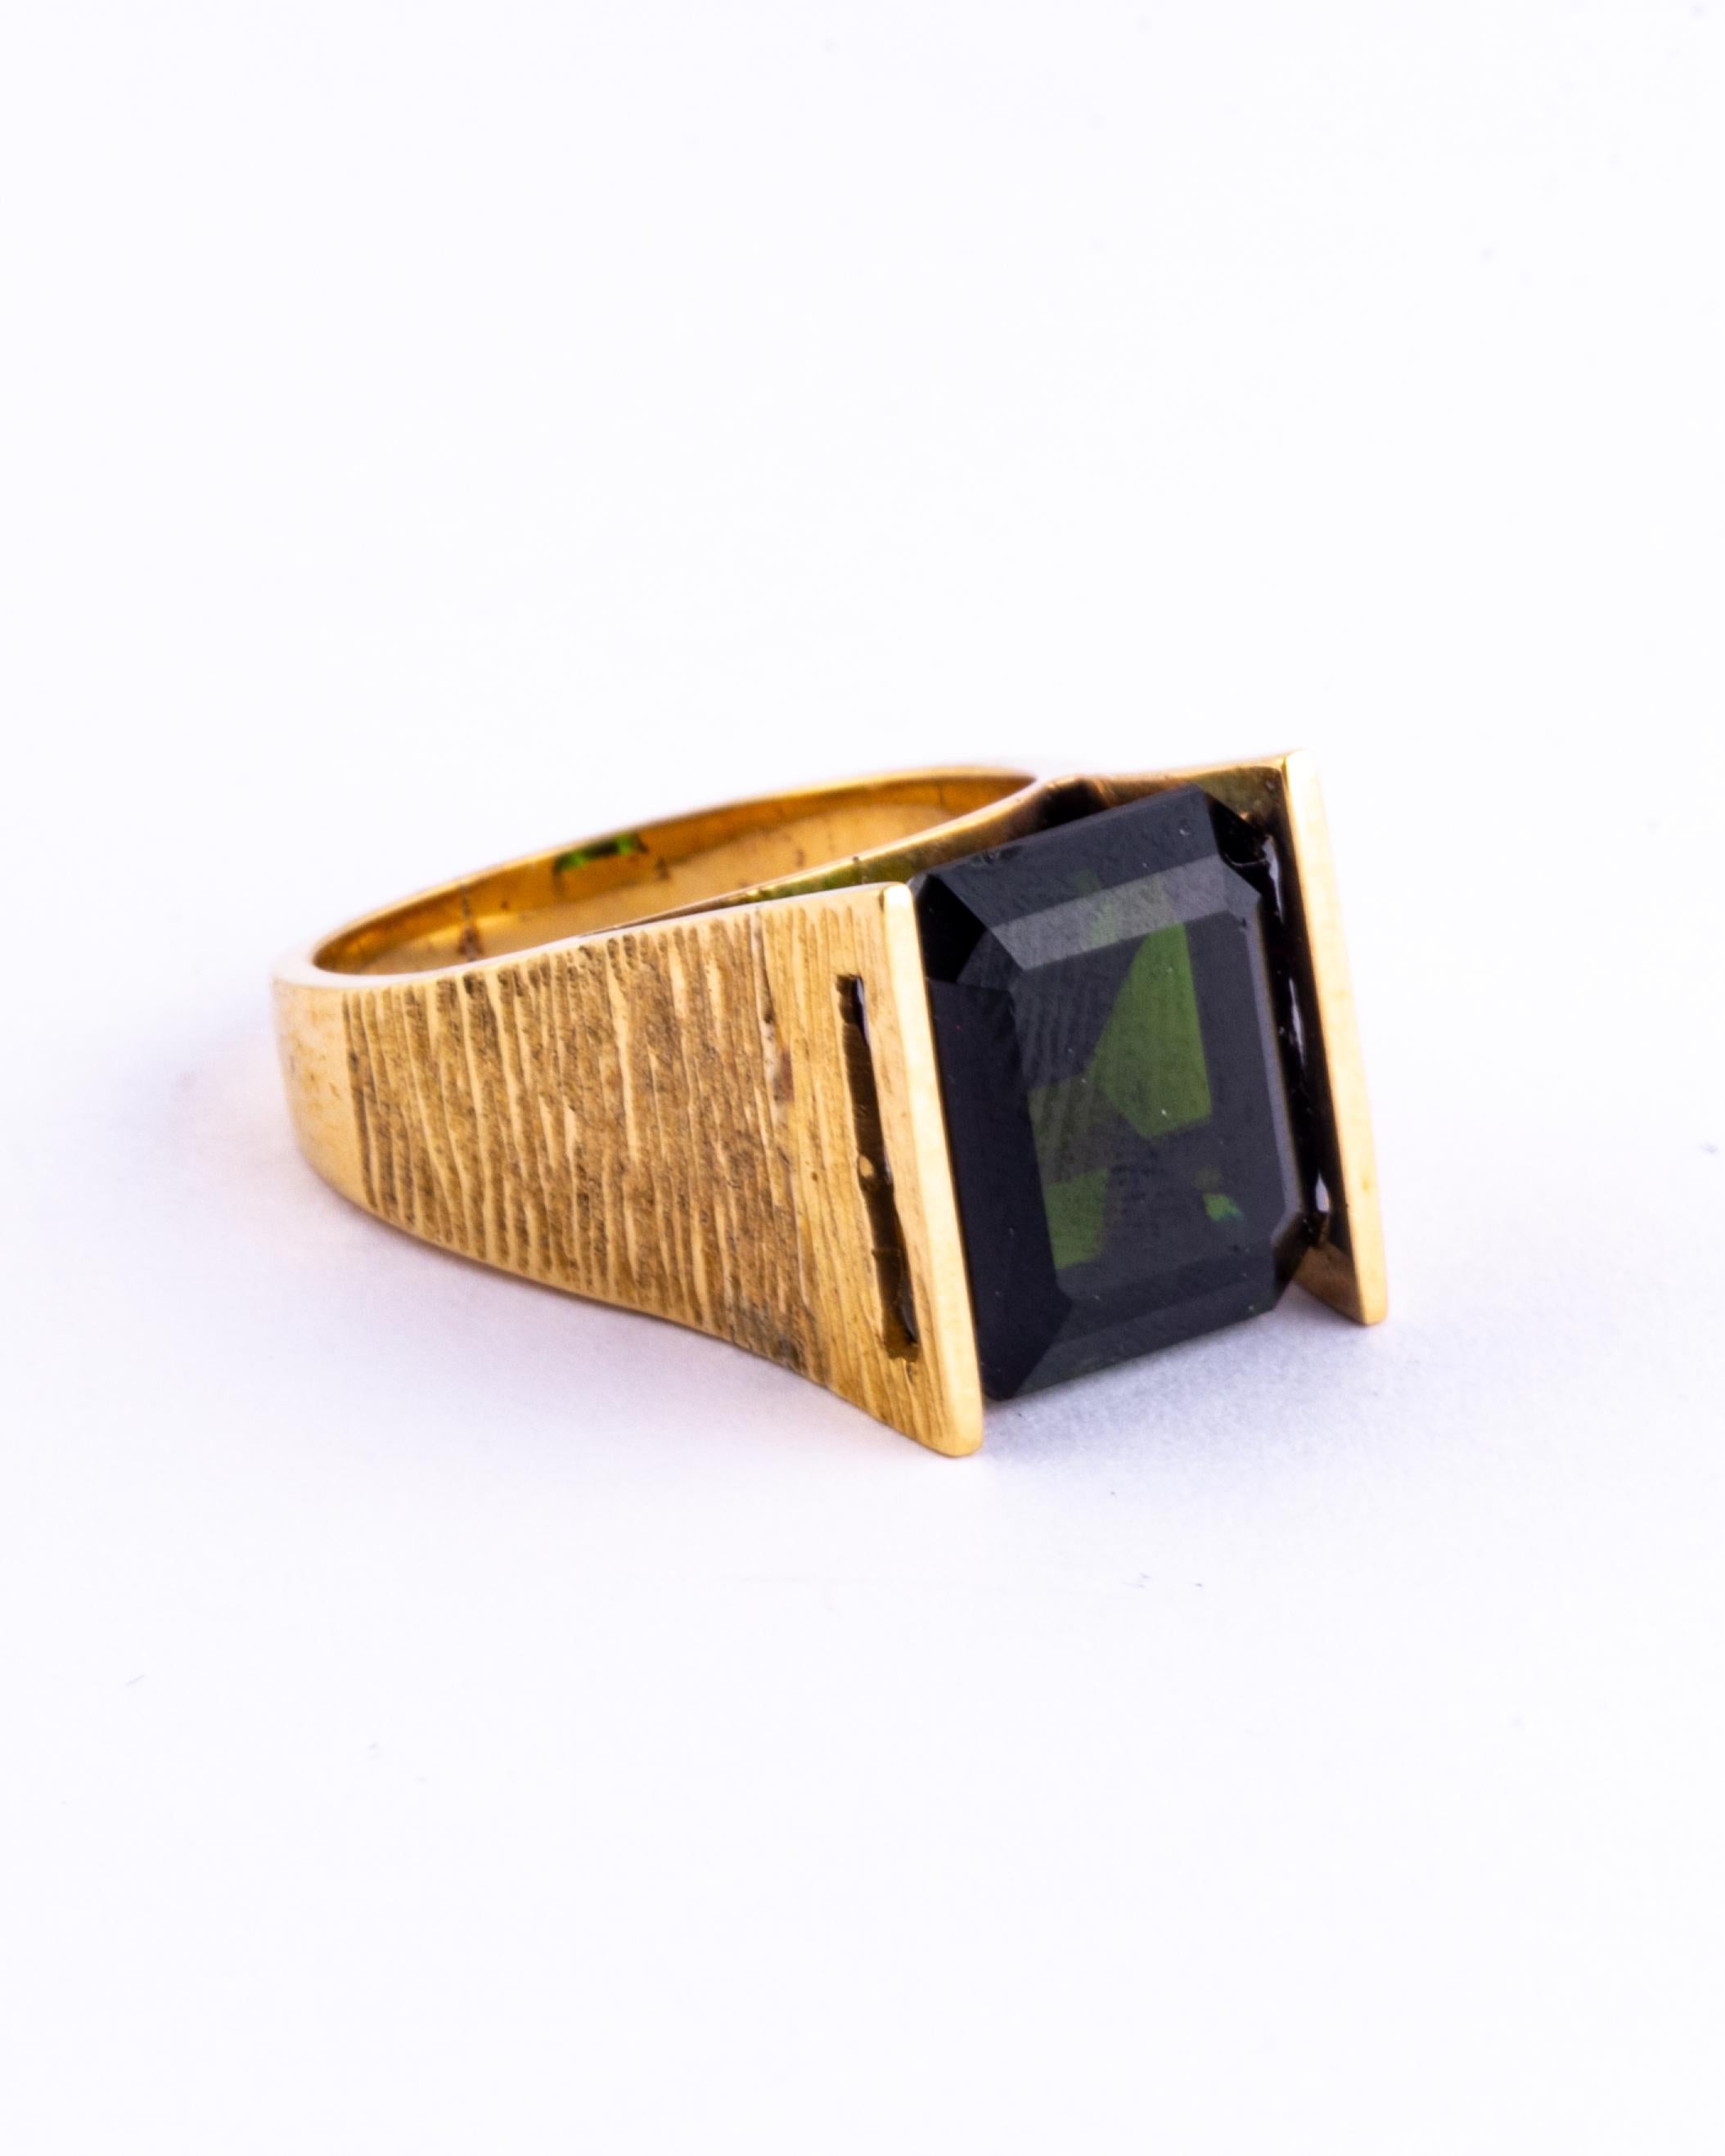 The deep green tourmaline is gorgeous and set simply up high in this 9 carat gold ring. The wide band has textured detail and has a futuristic feel about it. 

Ring Size: L or 5 3/4
Height Off Finger: 9mm
Stone Diameter: 12x10.5mm

Weight: 7.6g